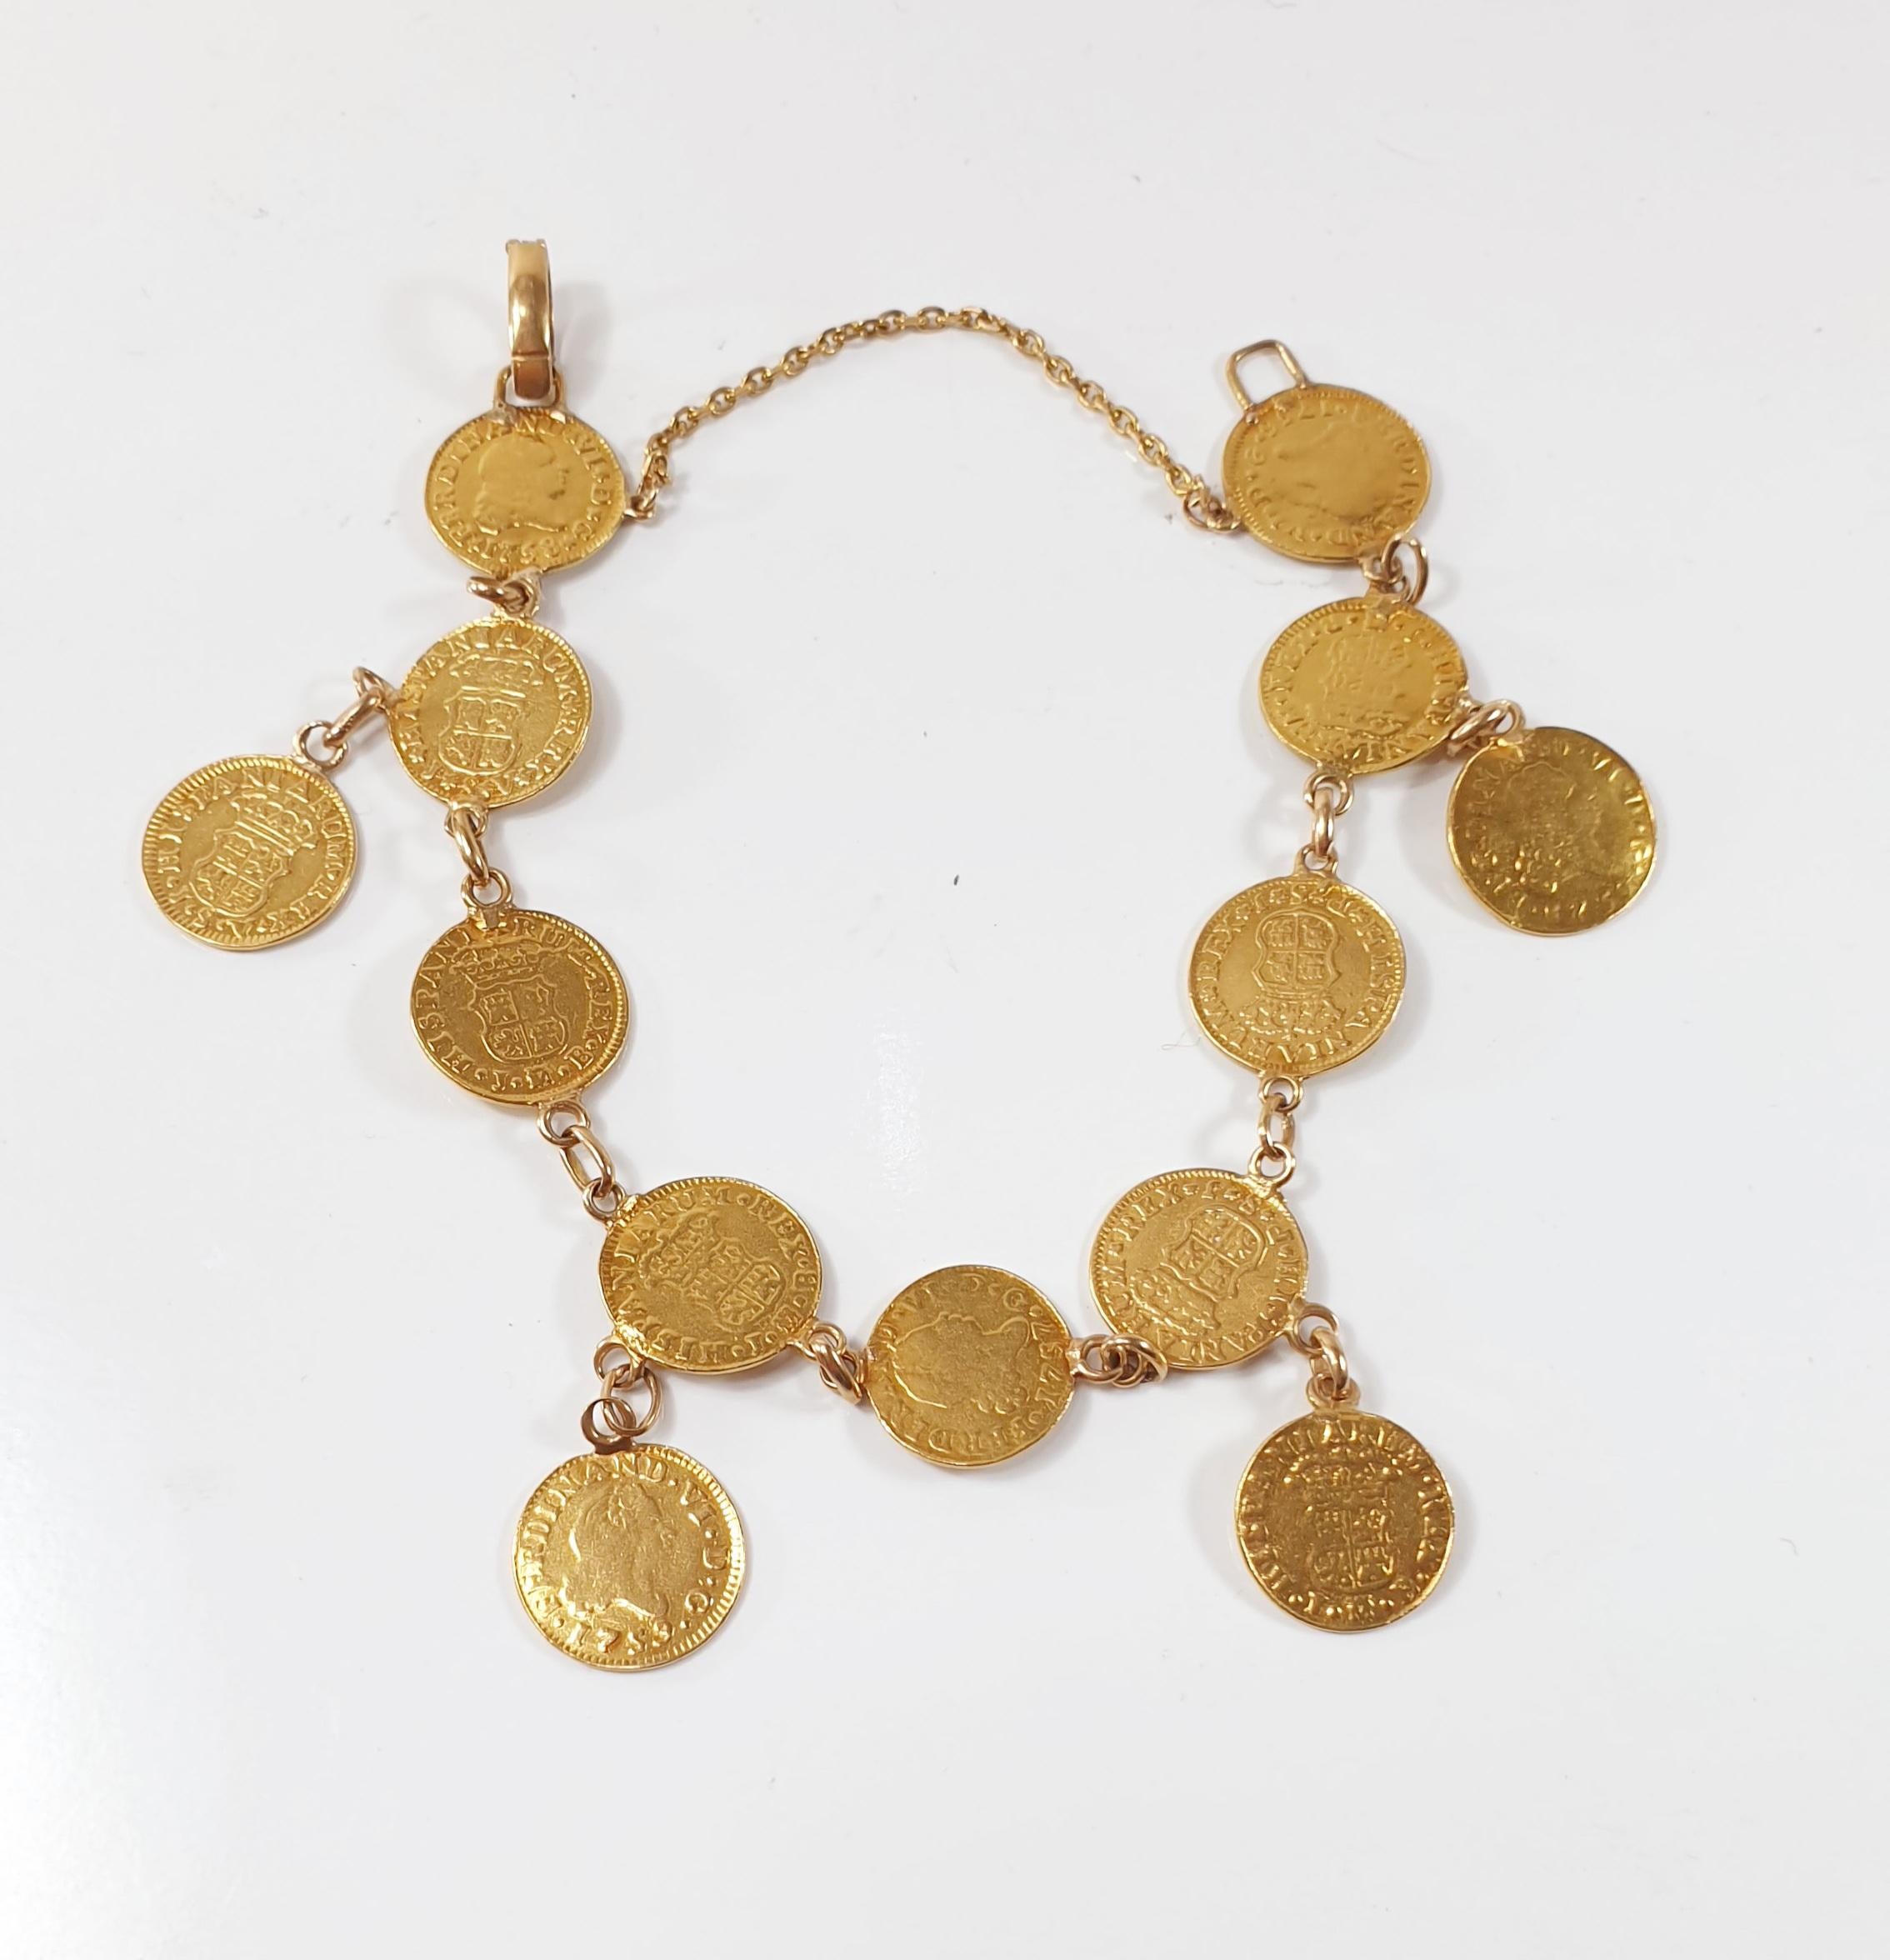  Gold Bracelet with Thirteen Coins of Fernando VI 1756
Thirteen Fernando VI coins from 1756 mounted on a bracelet
We will make it a necklace and we we will publish soon 

Rare Beautiful Authentic Shipwreck Doubloon gold Ferdinand VI Spanish Bracelet